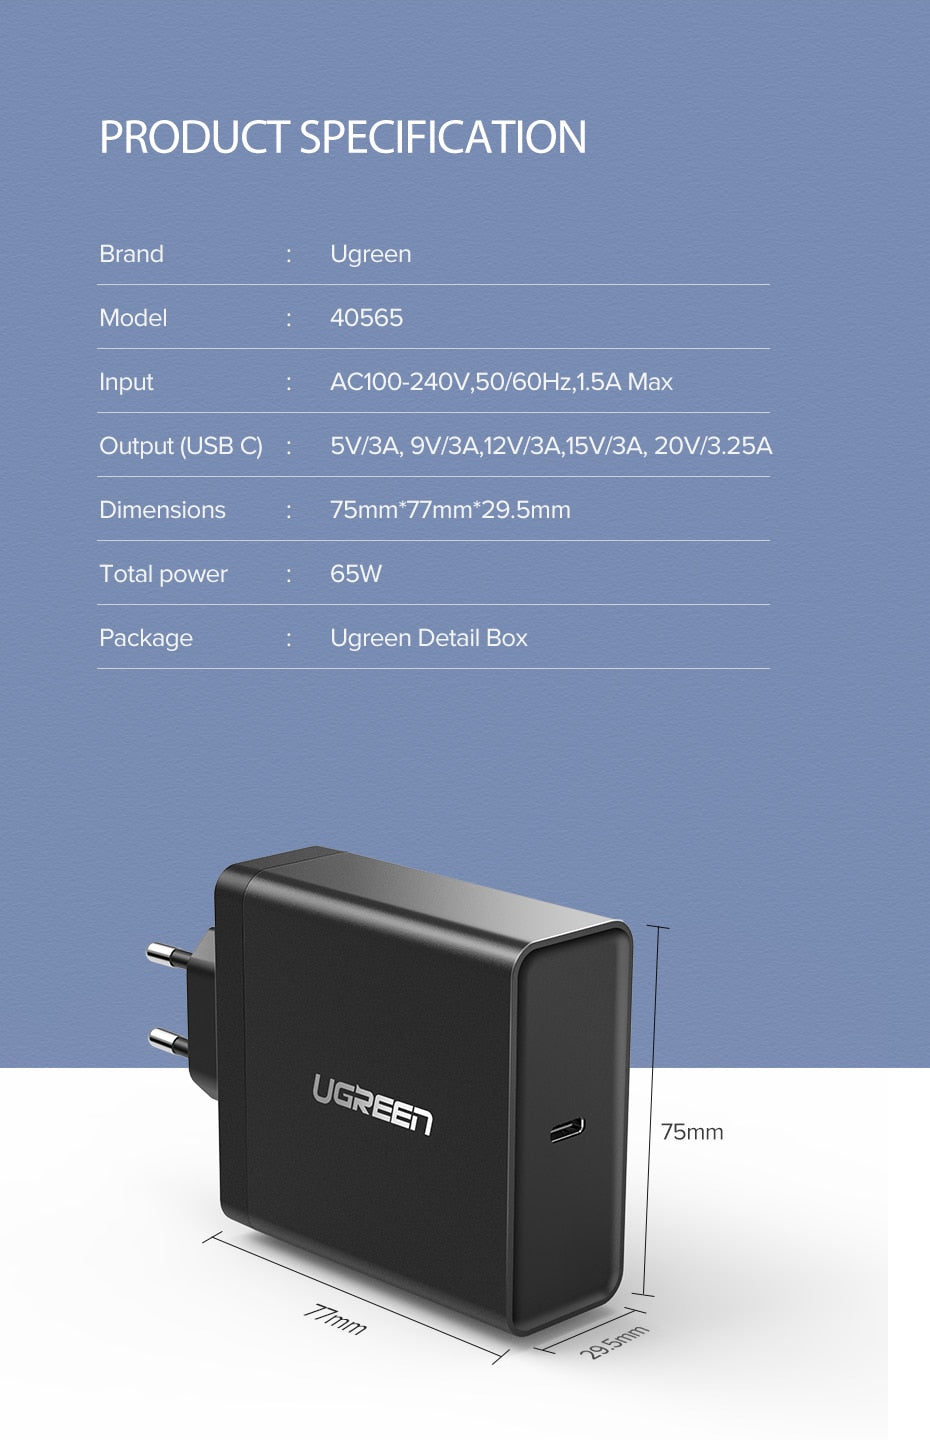 Ugreen PD 65W Charger USB type C Charger ( Macbook Supported ) - DG Services